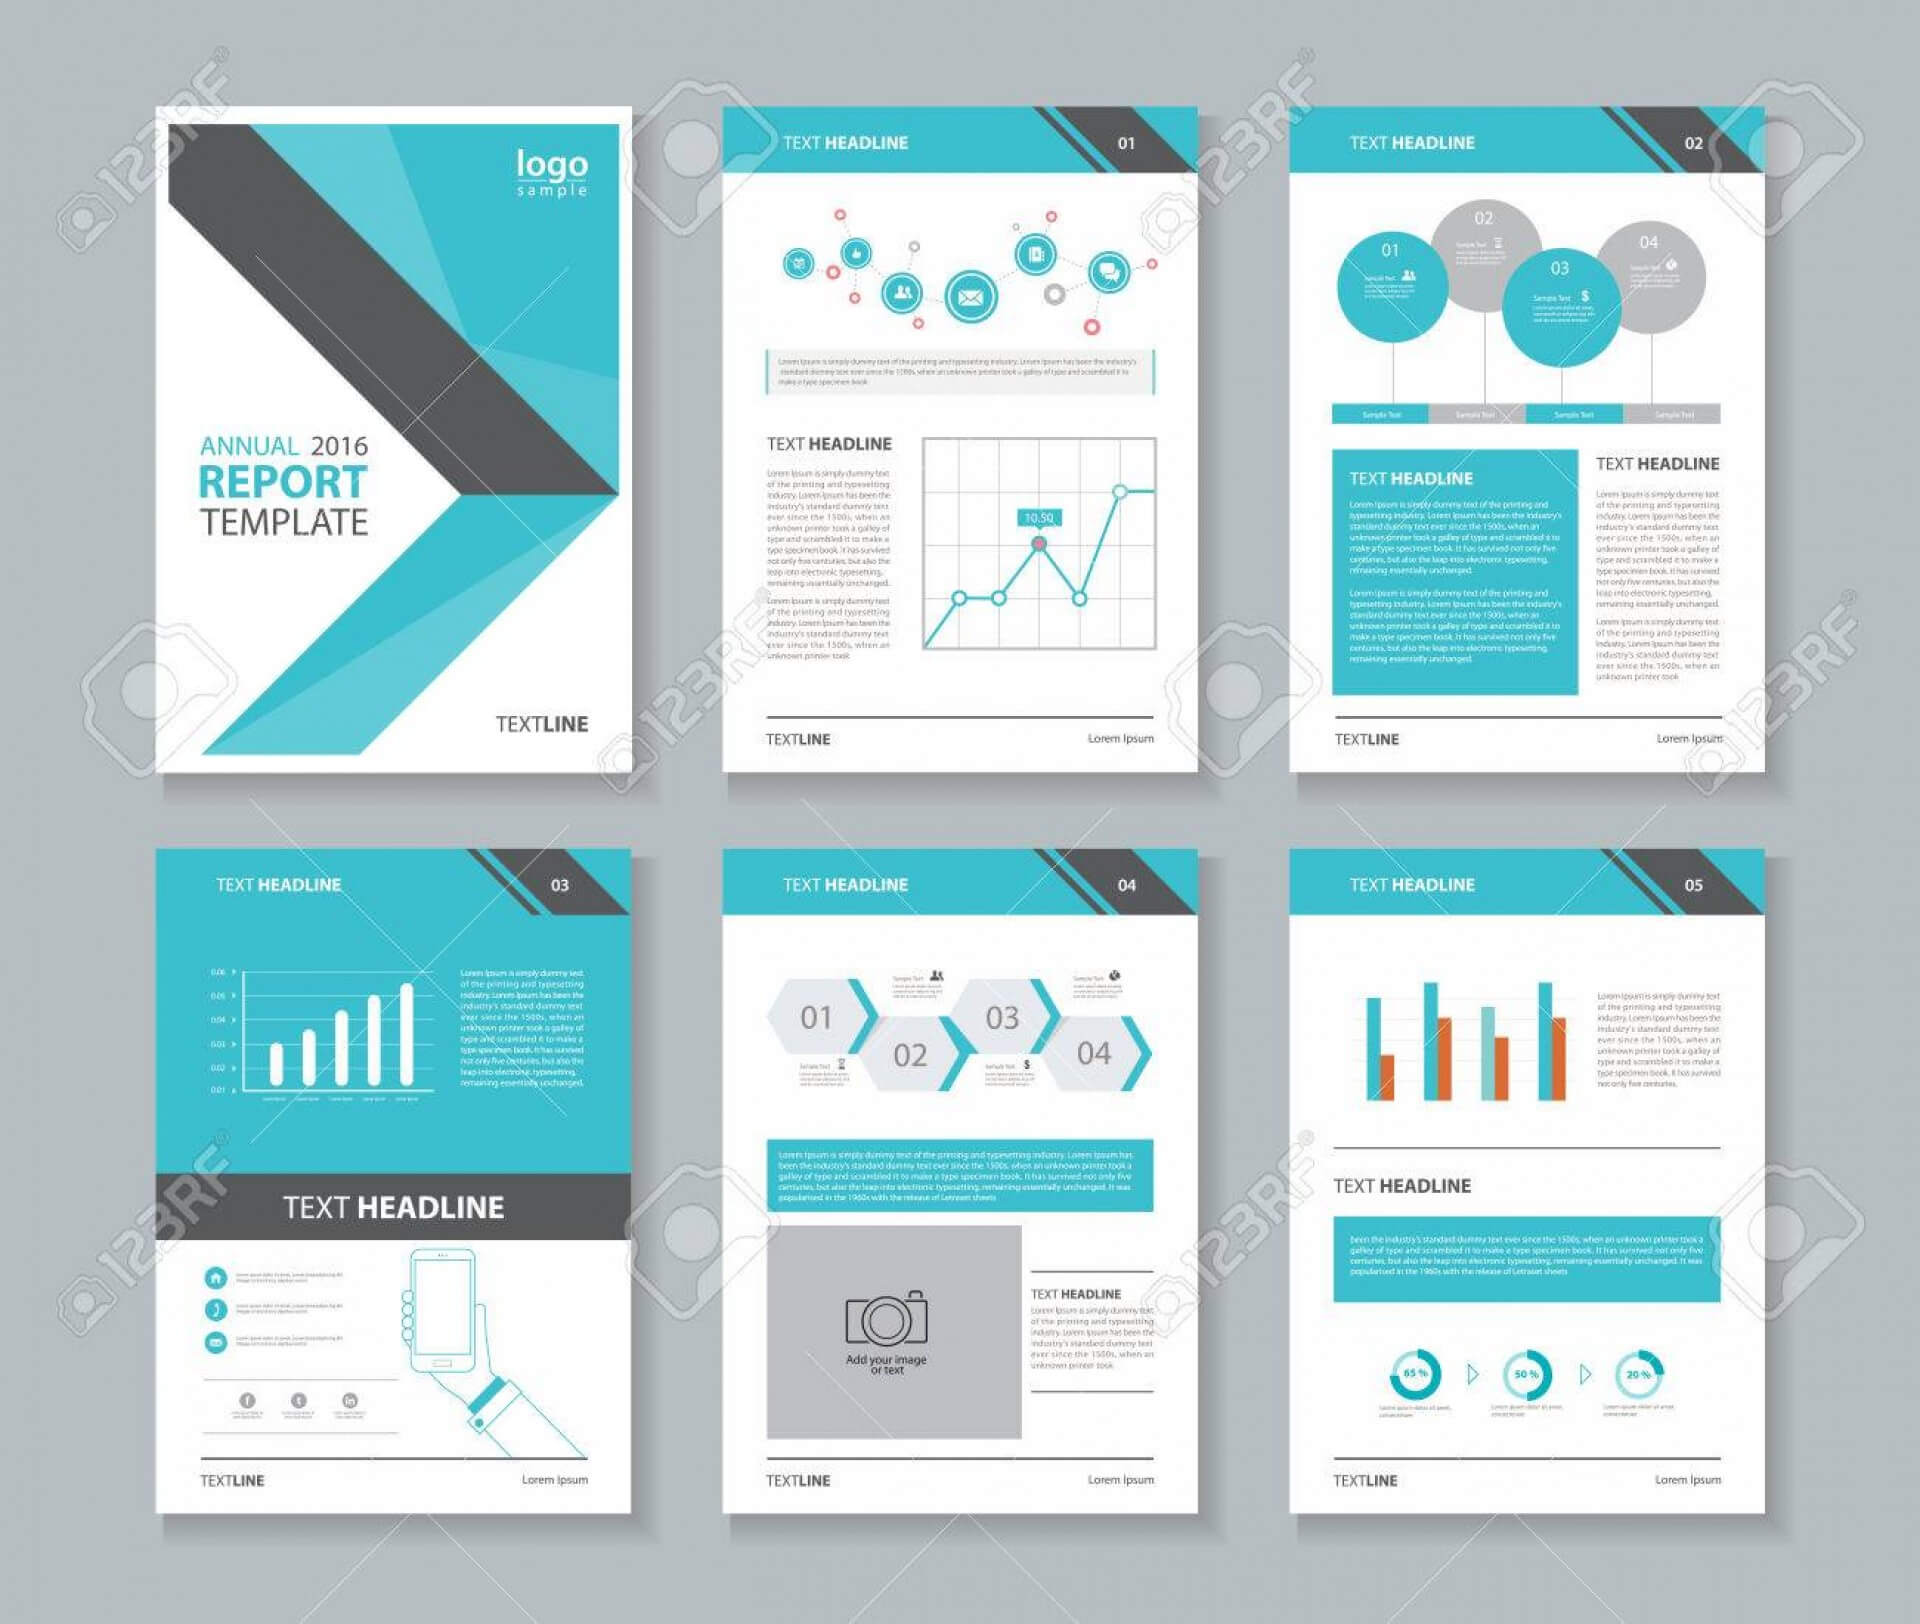 025 Free Annual Report Template Frightening Ideas Microsoft In Annual Report Template Word